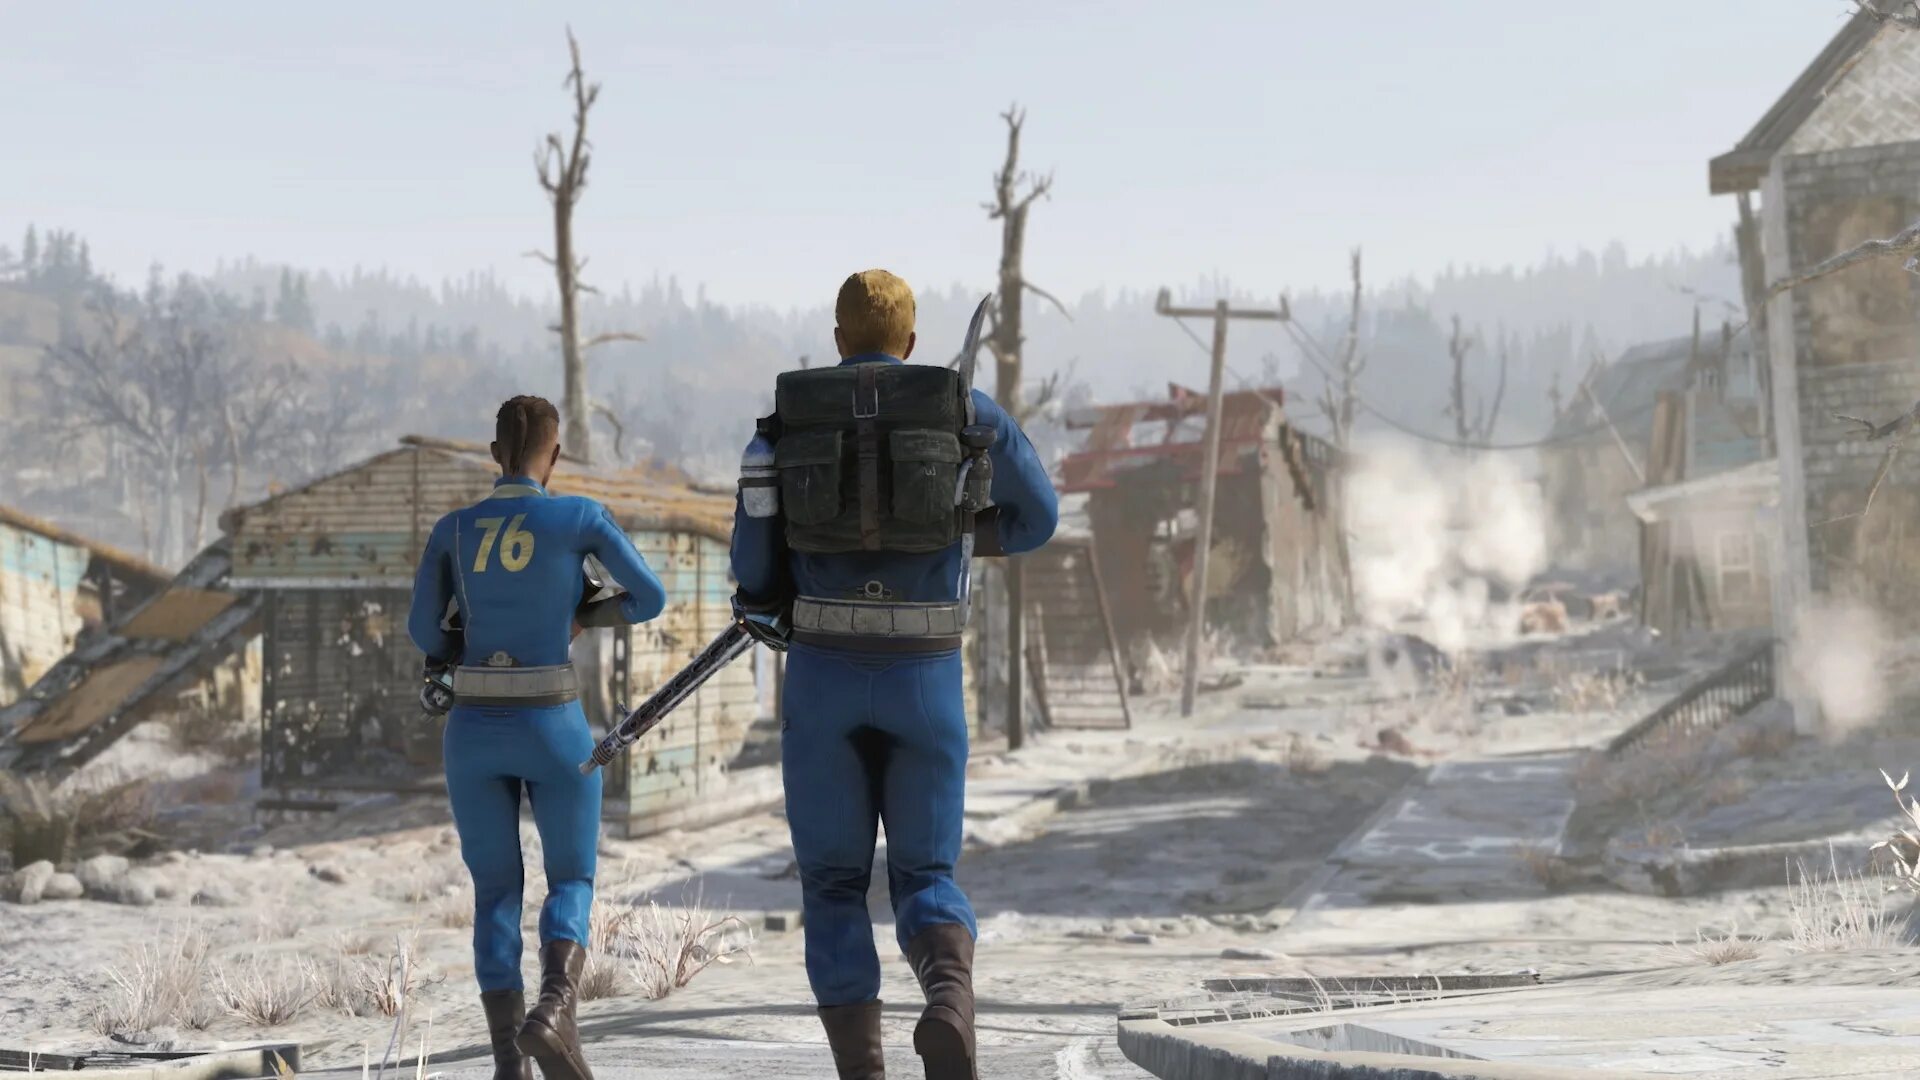 Купить фоллаут 76. Фоллаут 76. Фоллаут 76 Wastelanders. Fallout 76 игроки. Fallout 76 Wastelanders game.